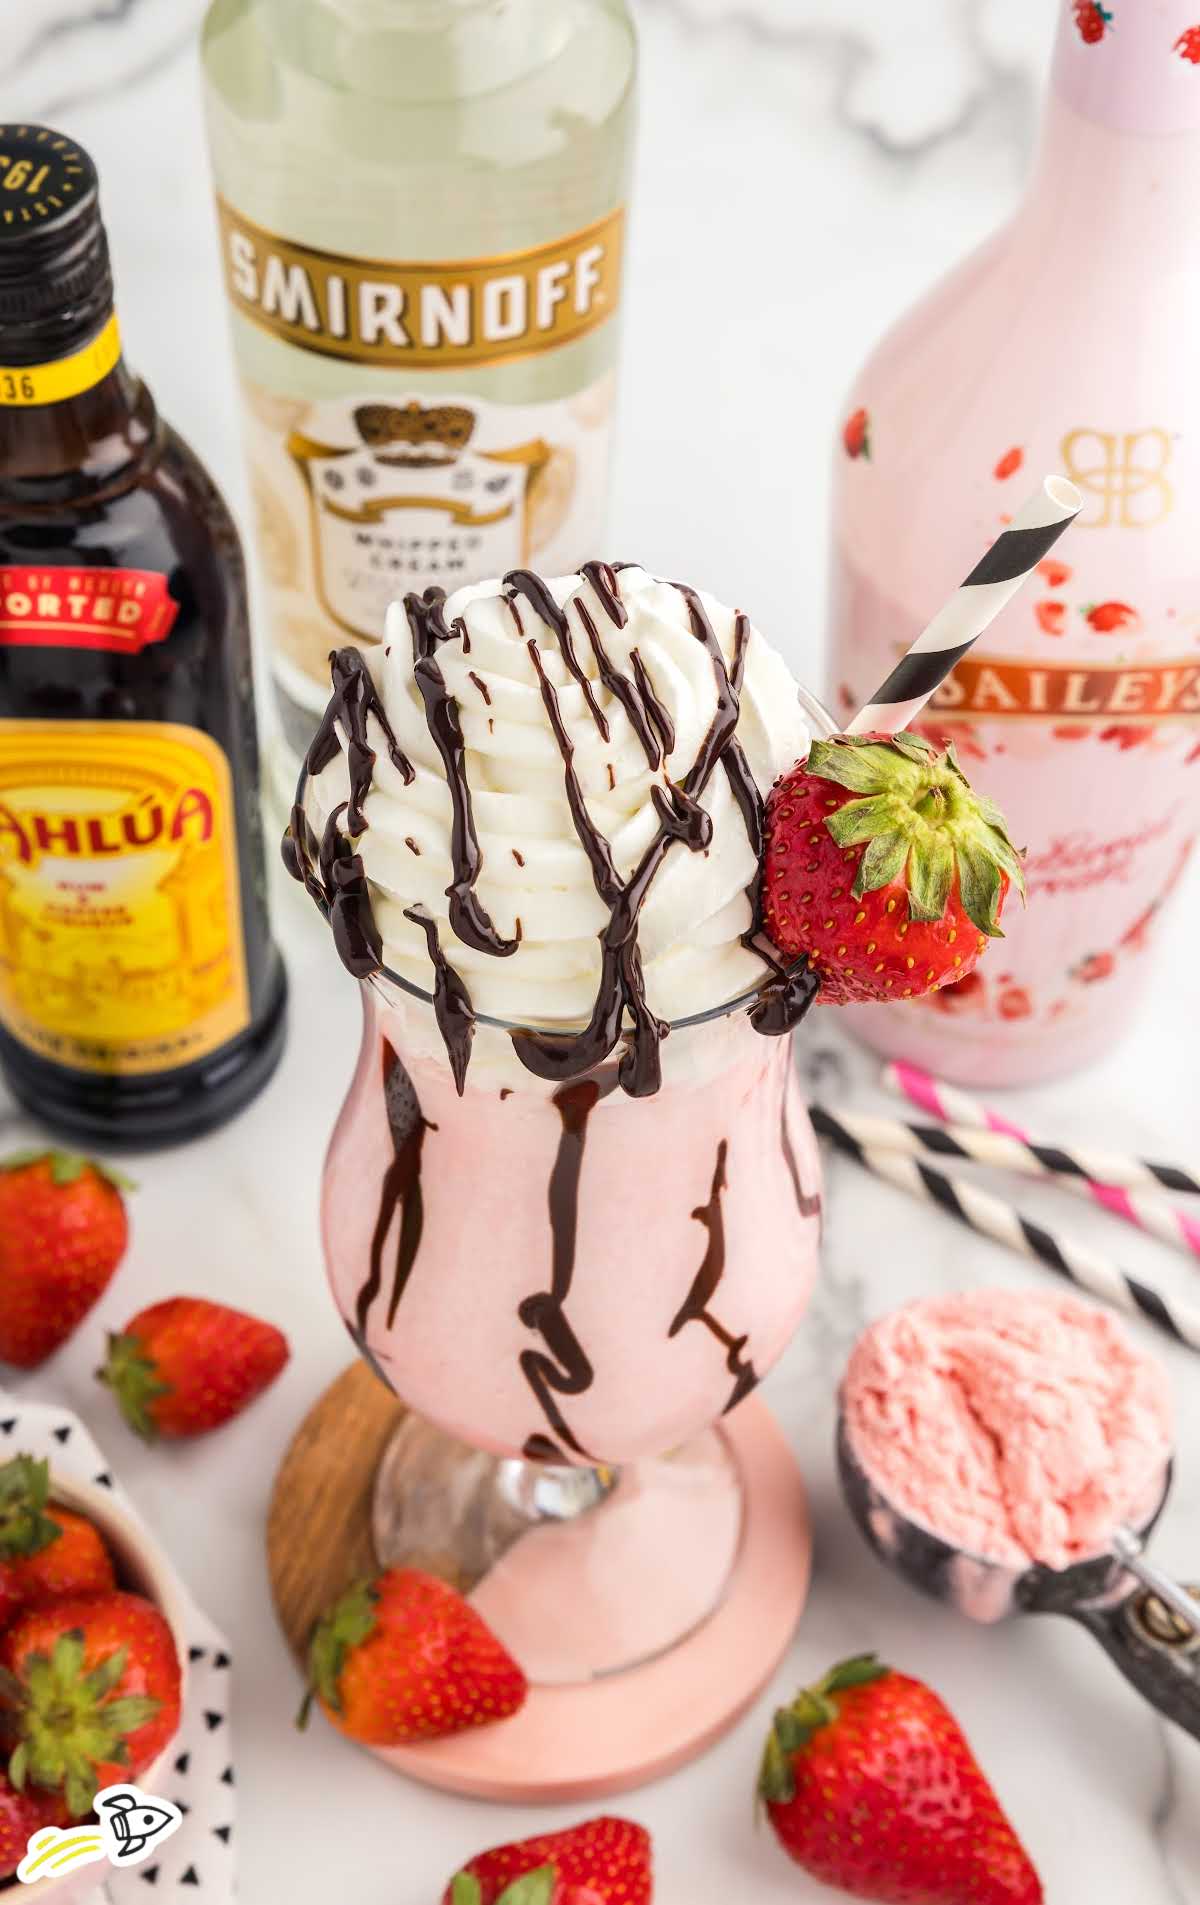 close up shot of a glass of Strawberry Mudslide topped with chocolate sauce, whipped cream, and a strawberry